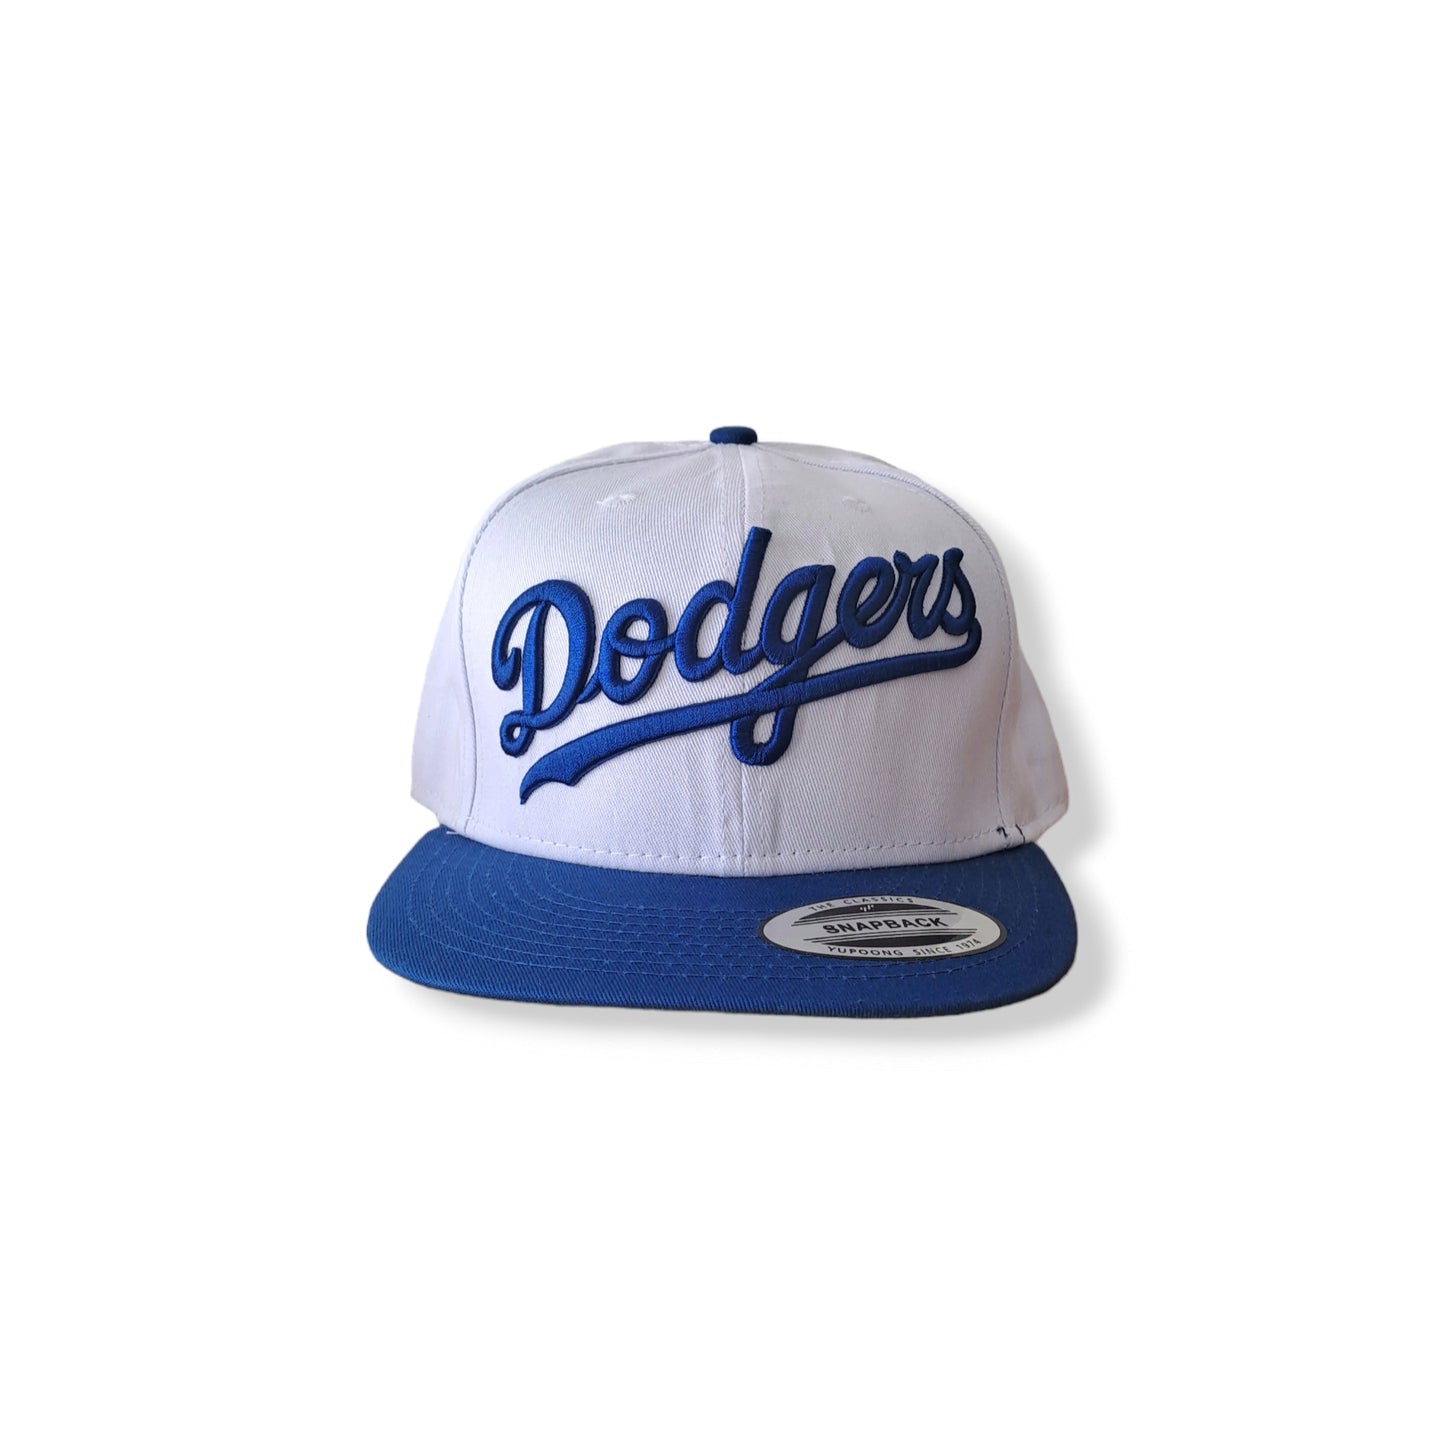 White and blue Los Angeles Dodgers hat